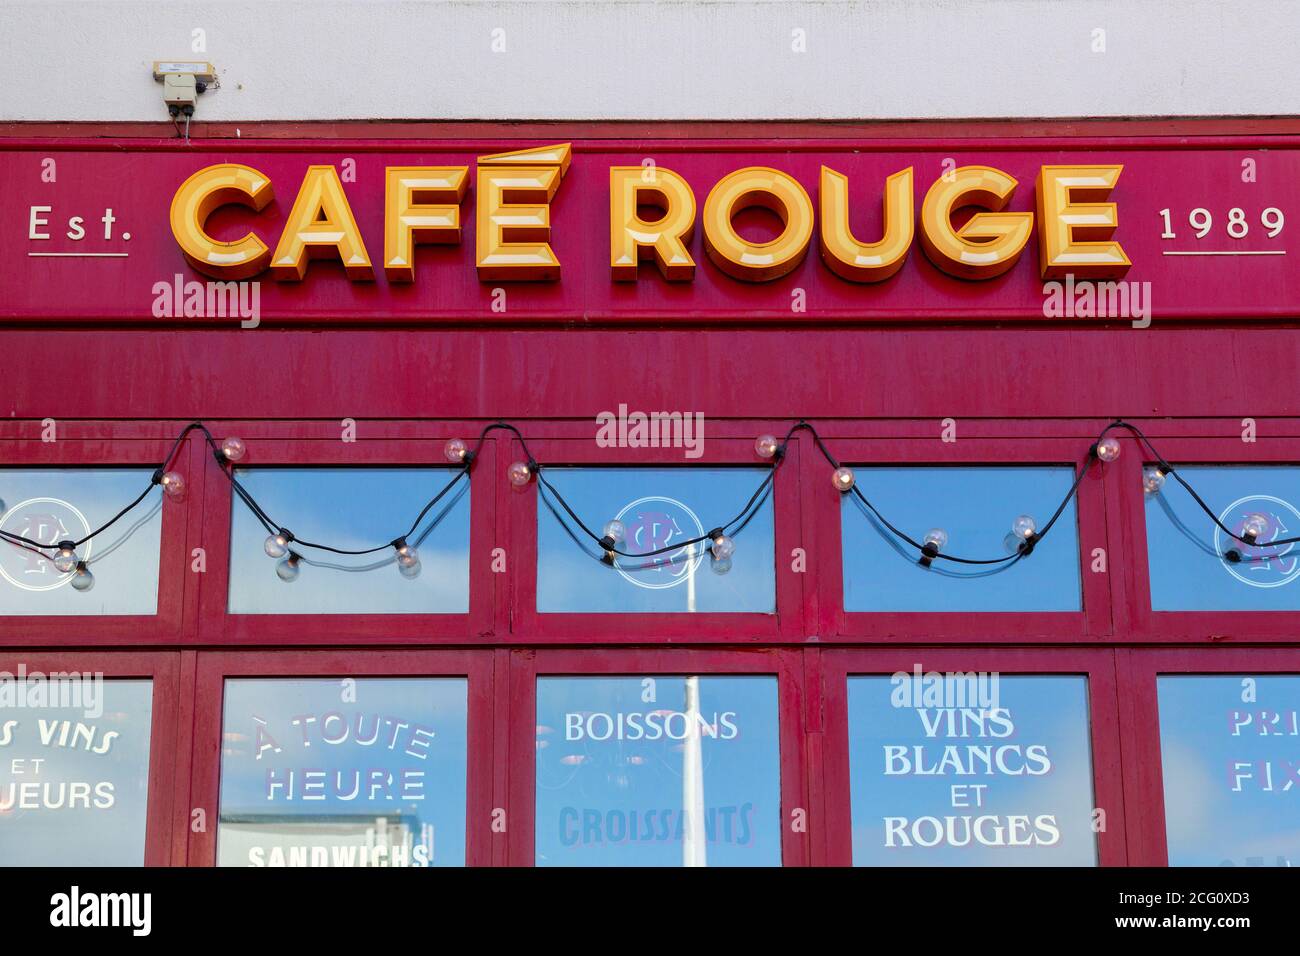 The exterior or facade of a Cafe Rouge Restaurant showing the company logo sign Stock Photo